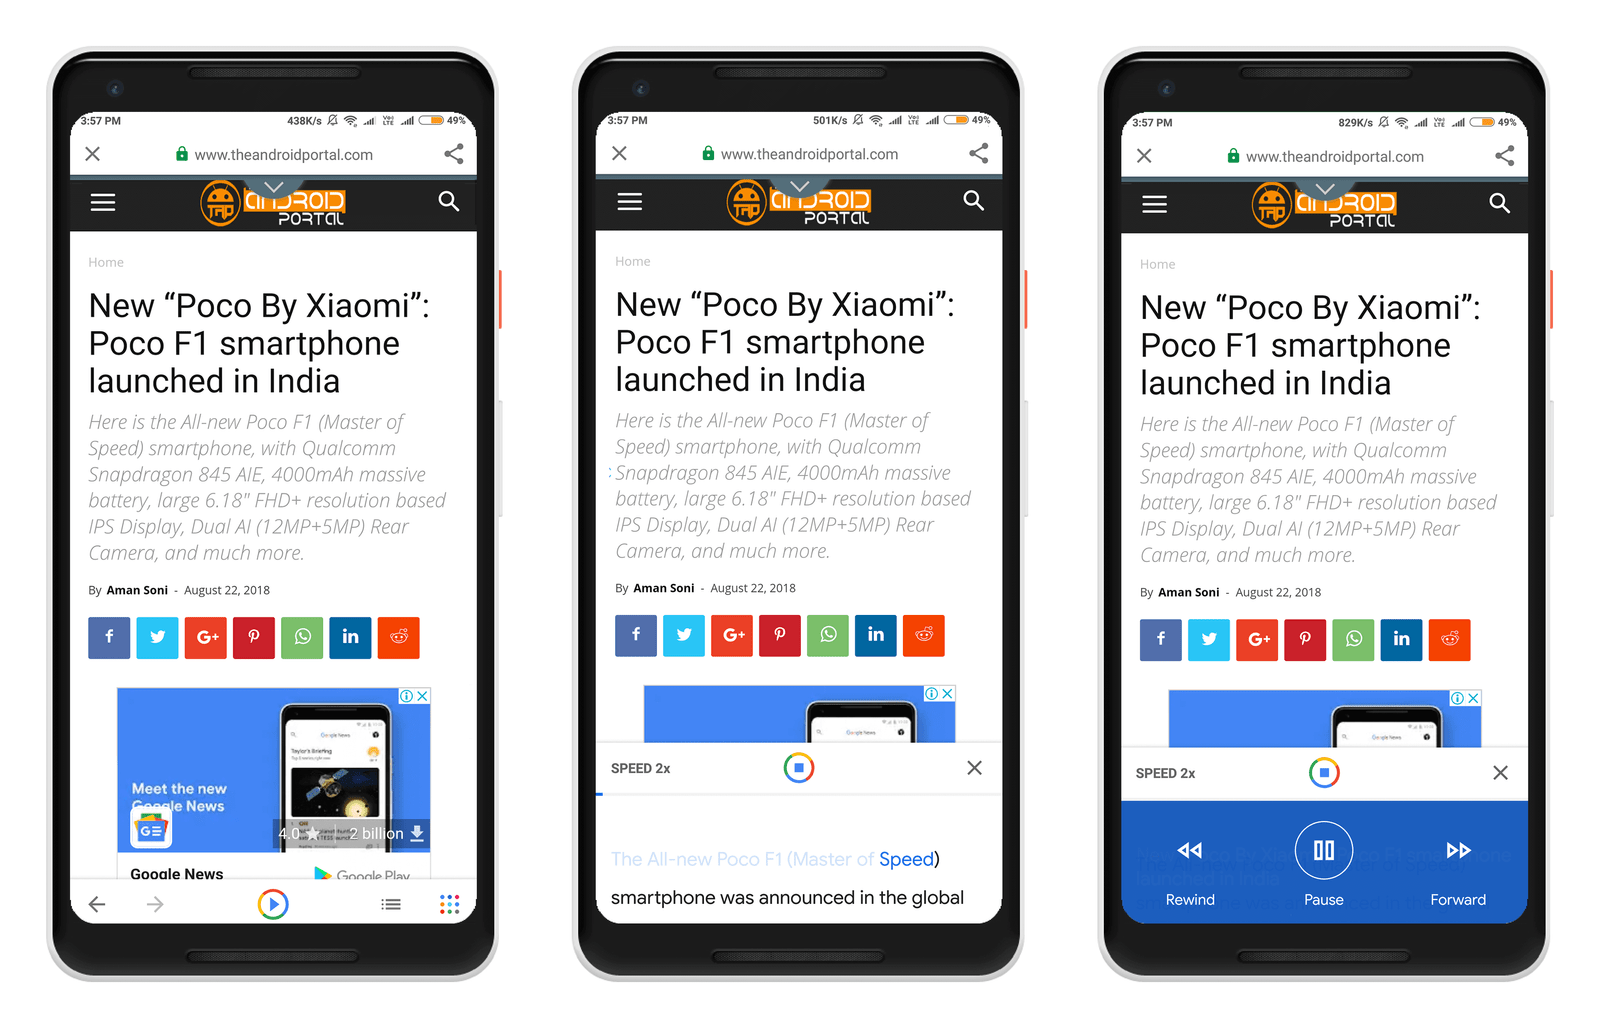 Google Go App Can Now Read Any Article & Web Pages 1